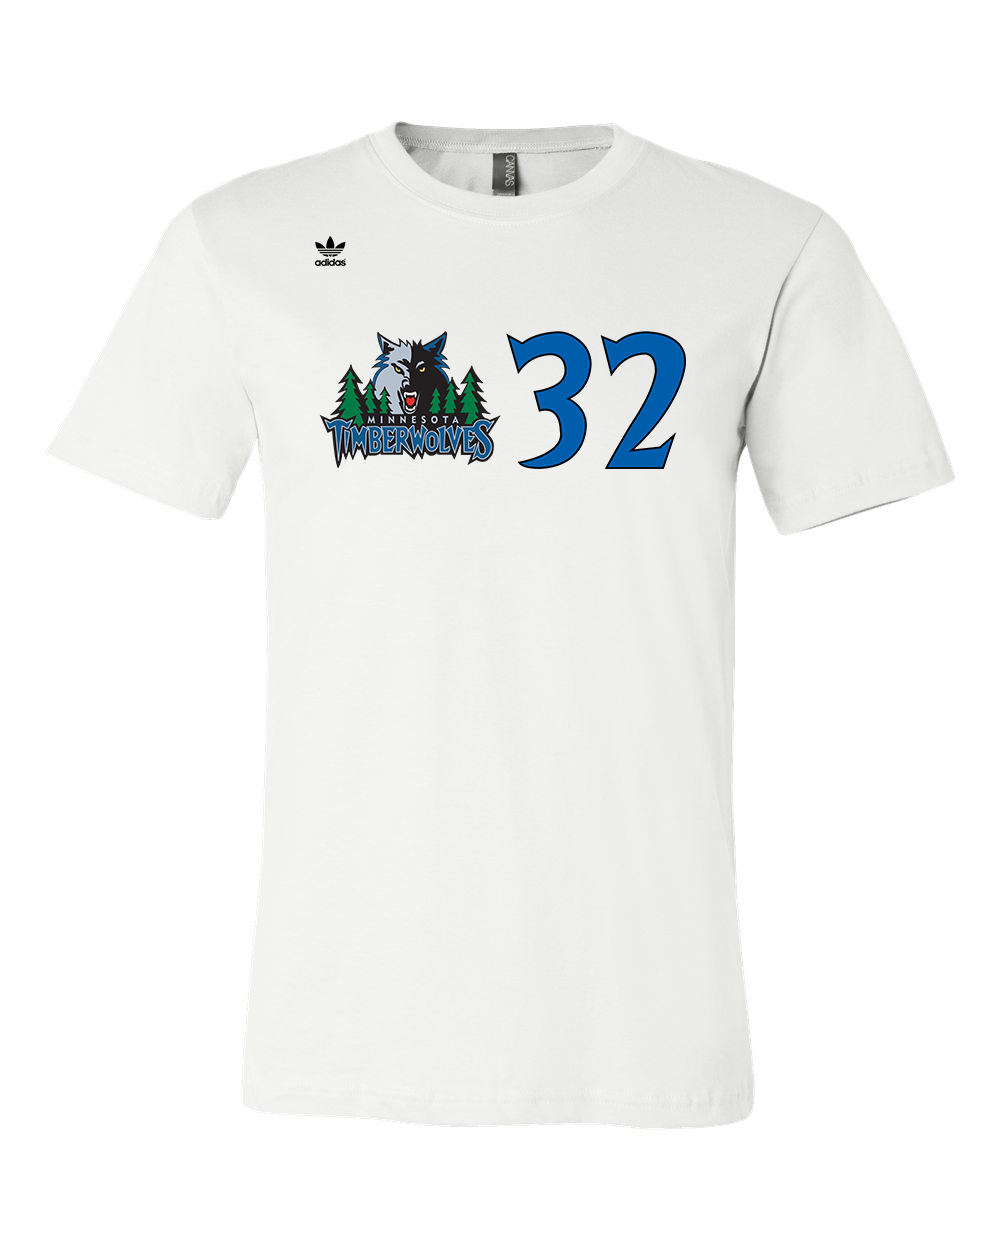 Outerstuff Youth Minnesota Timberwolves Karl-Anthony Towns #32 Green  Statement T-Shirt